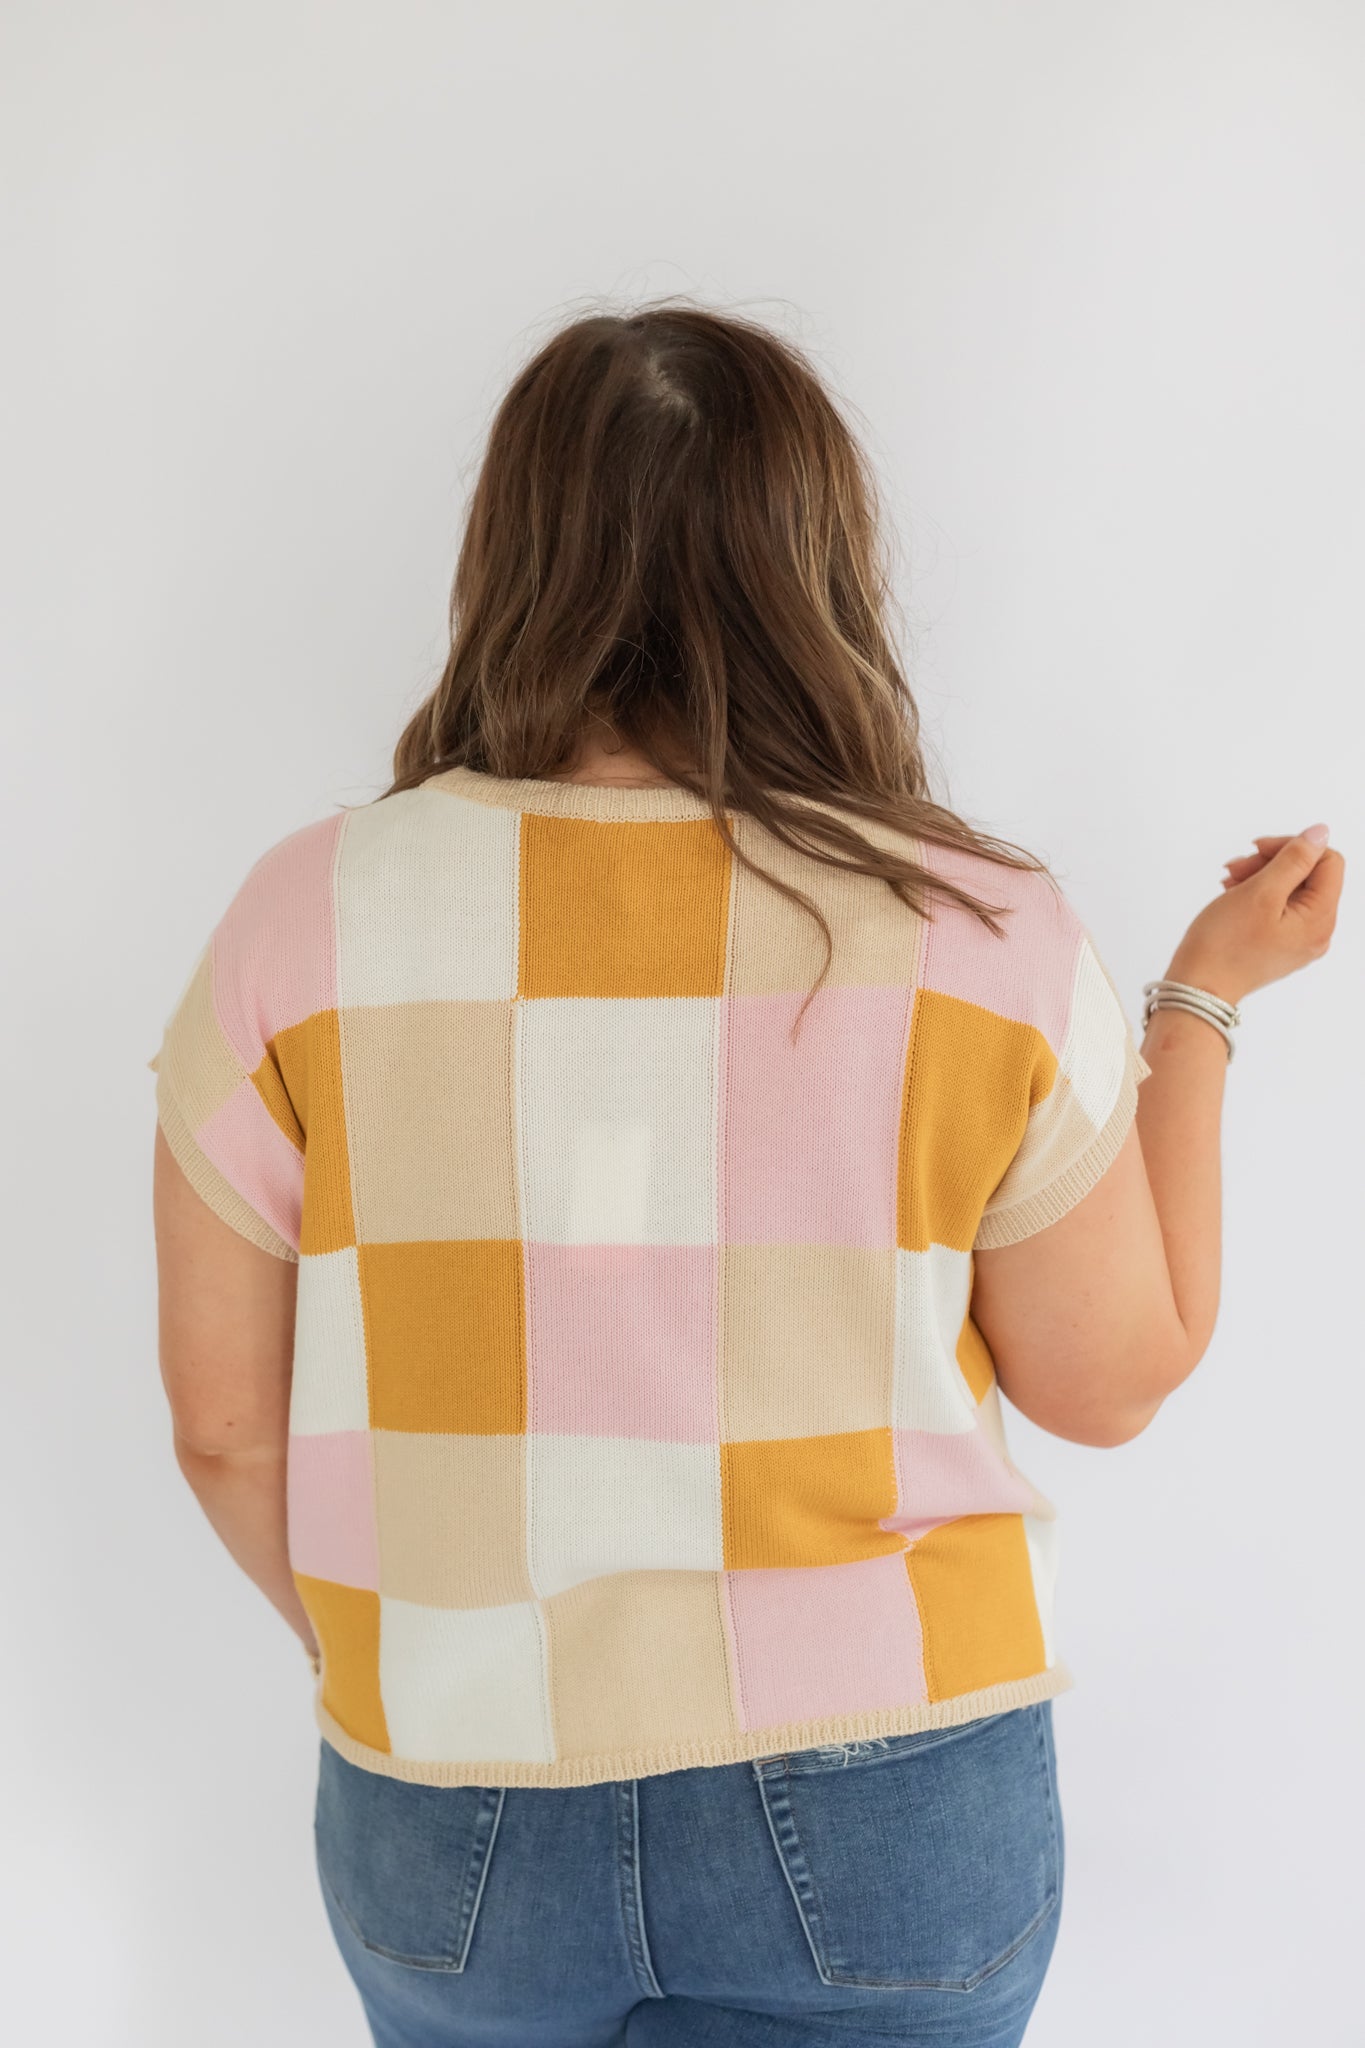 A CHECKERED MOMENT TOP